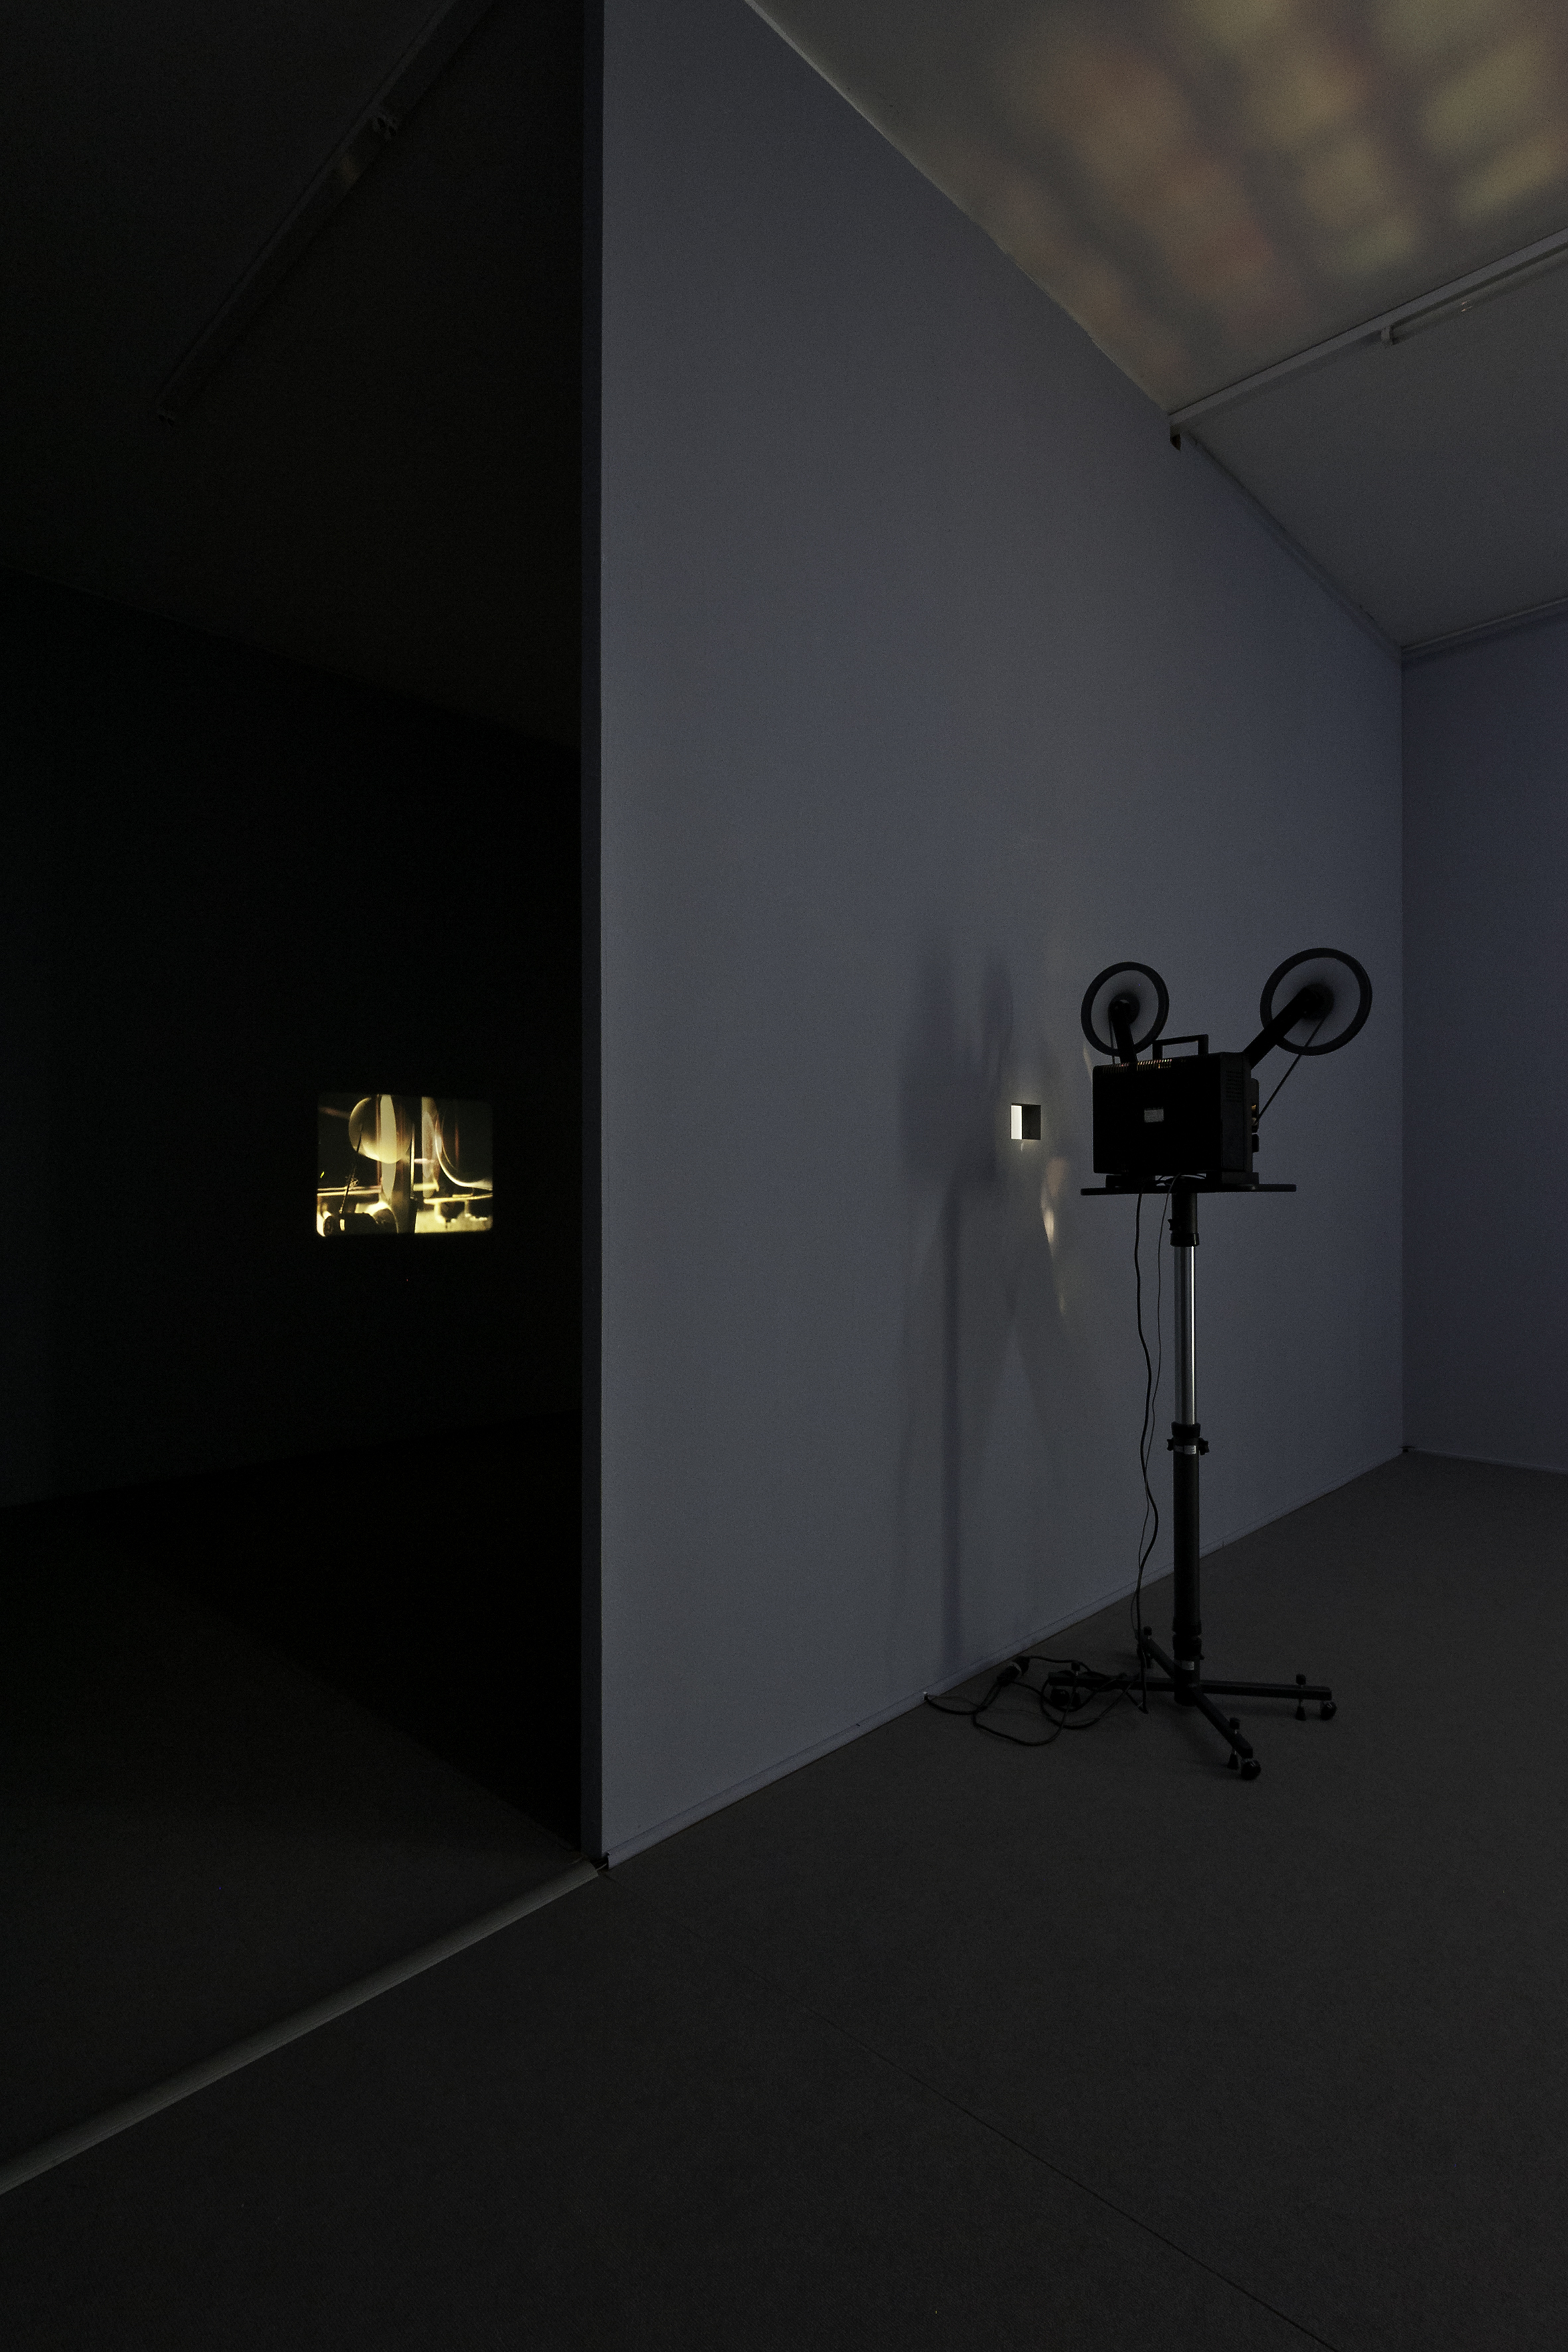 Exhibition view at Kunsthalle Winterthur, photo: Christian Schwager, 2013